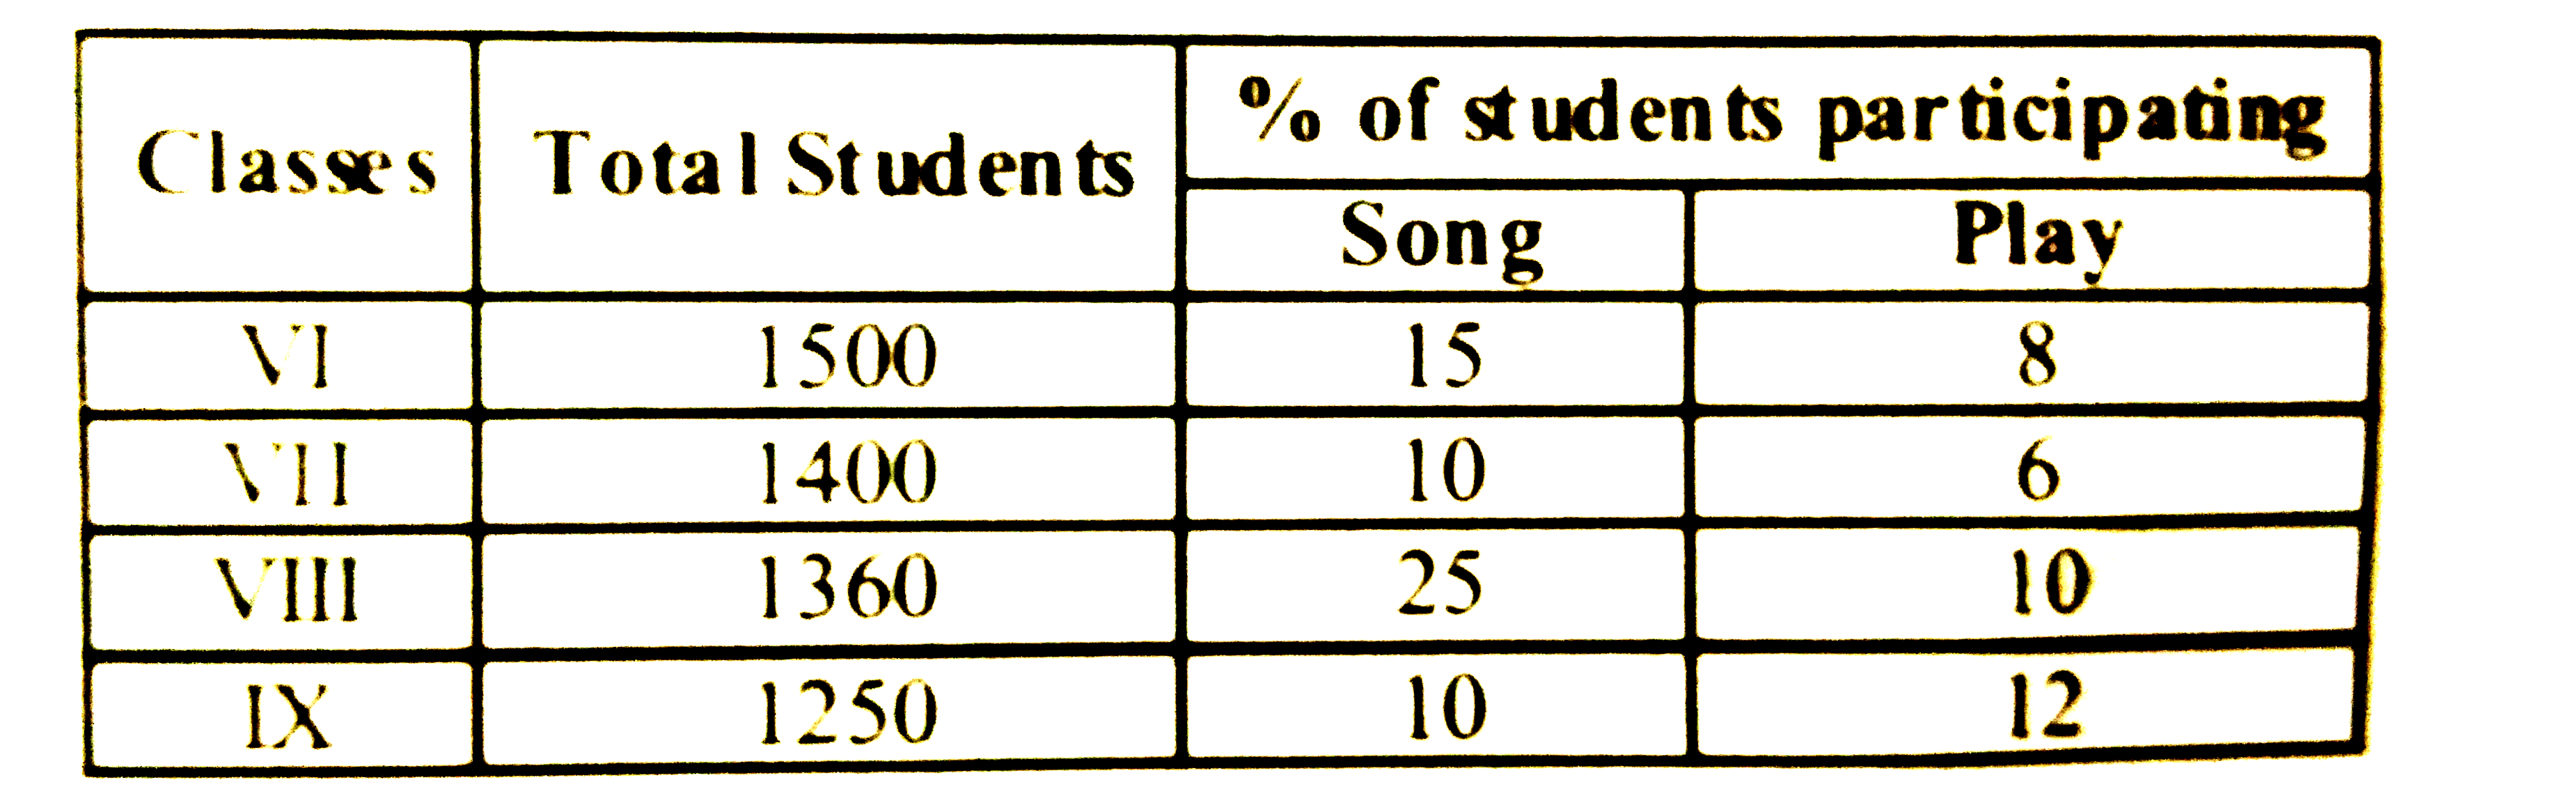 What is the difference of students participating in song from class VIII and IX together to the students participating in Play from same class together ?